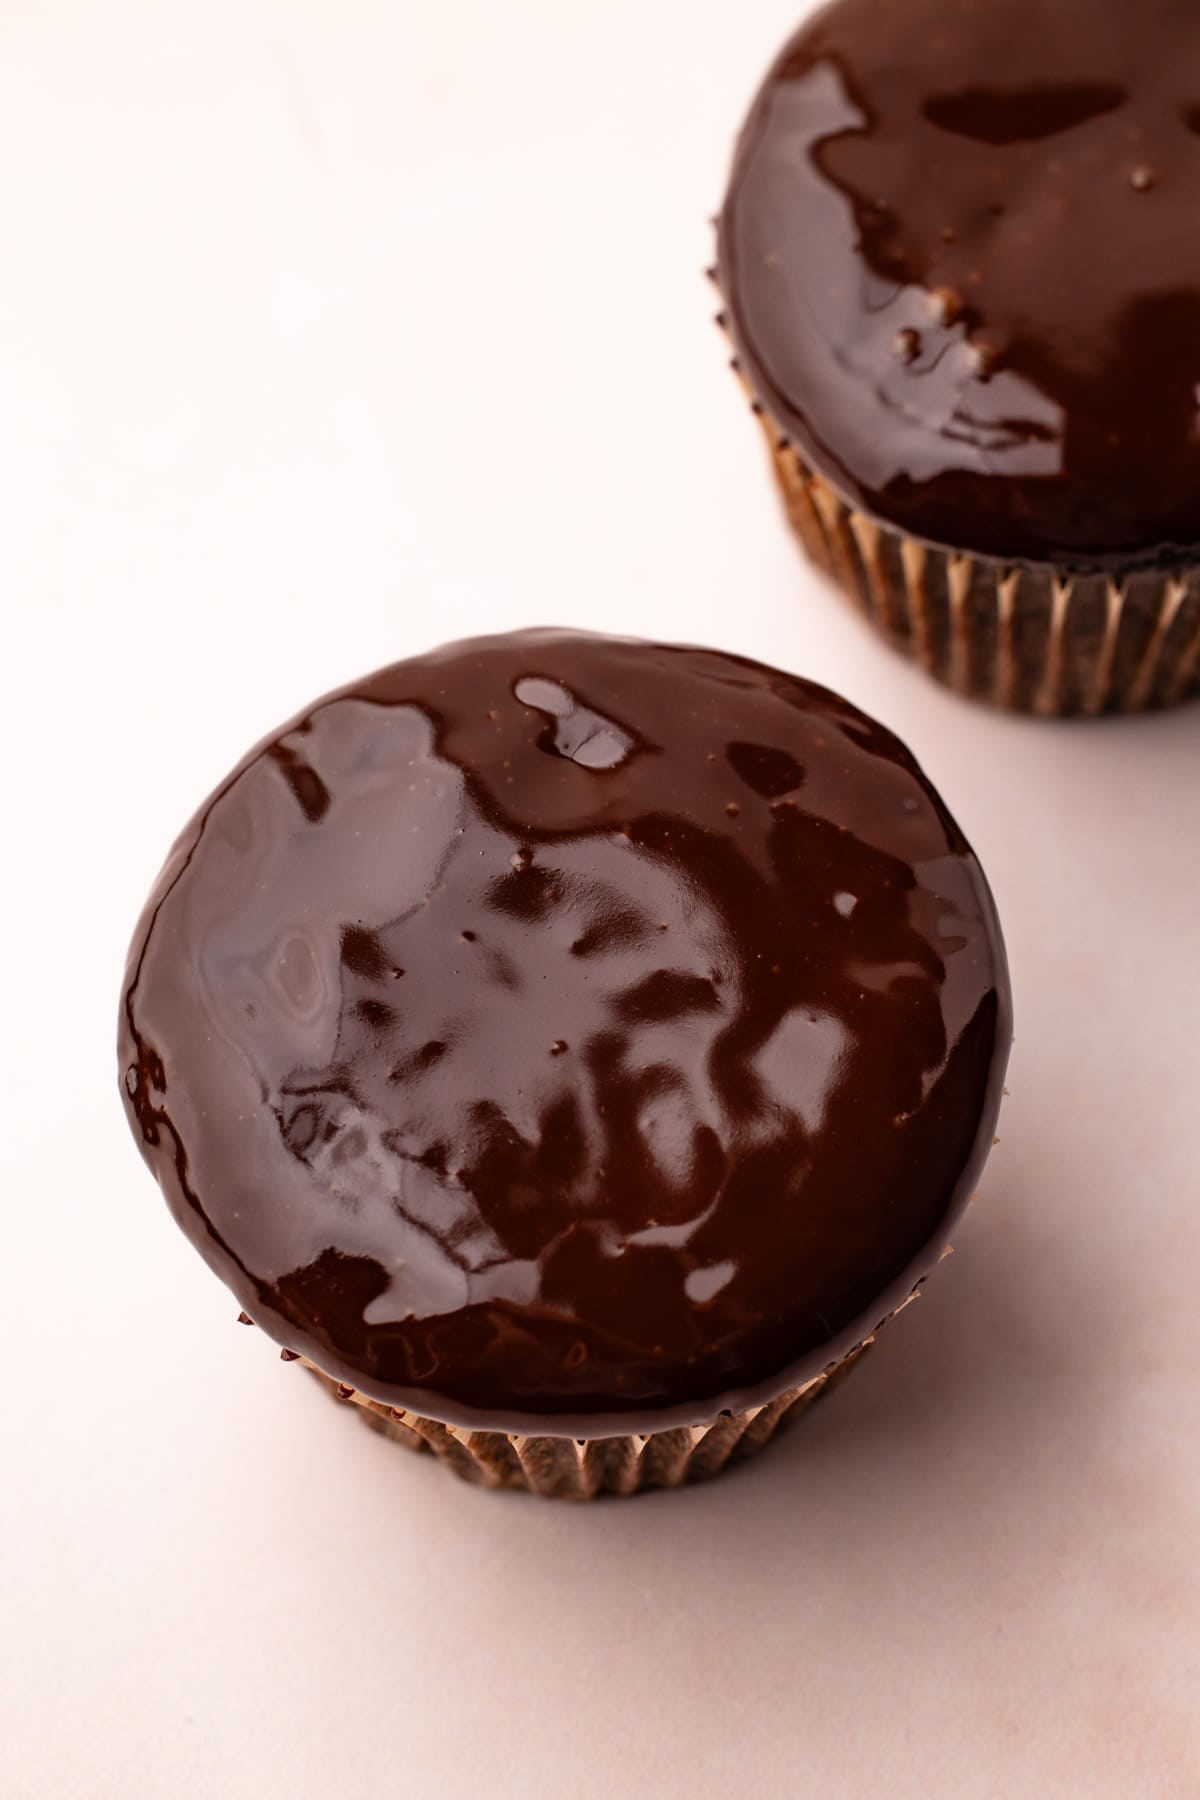 Shiny, melted chocolate ganache sauce on top of a chocolate cupcake.